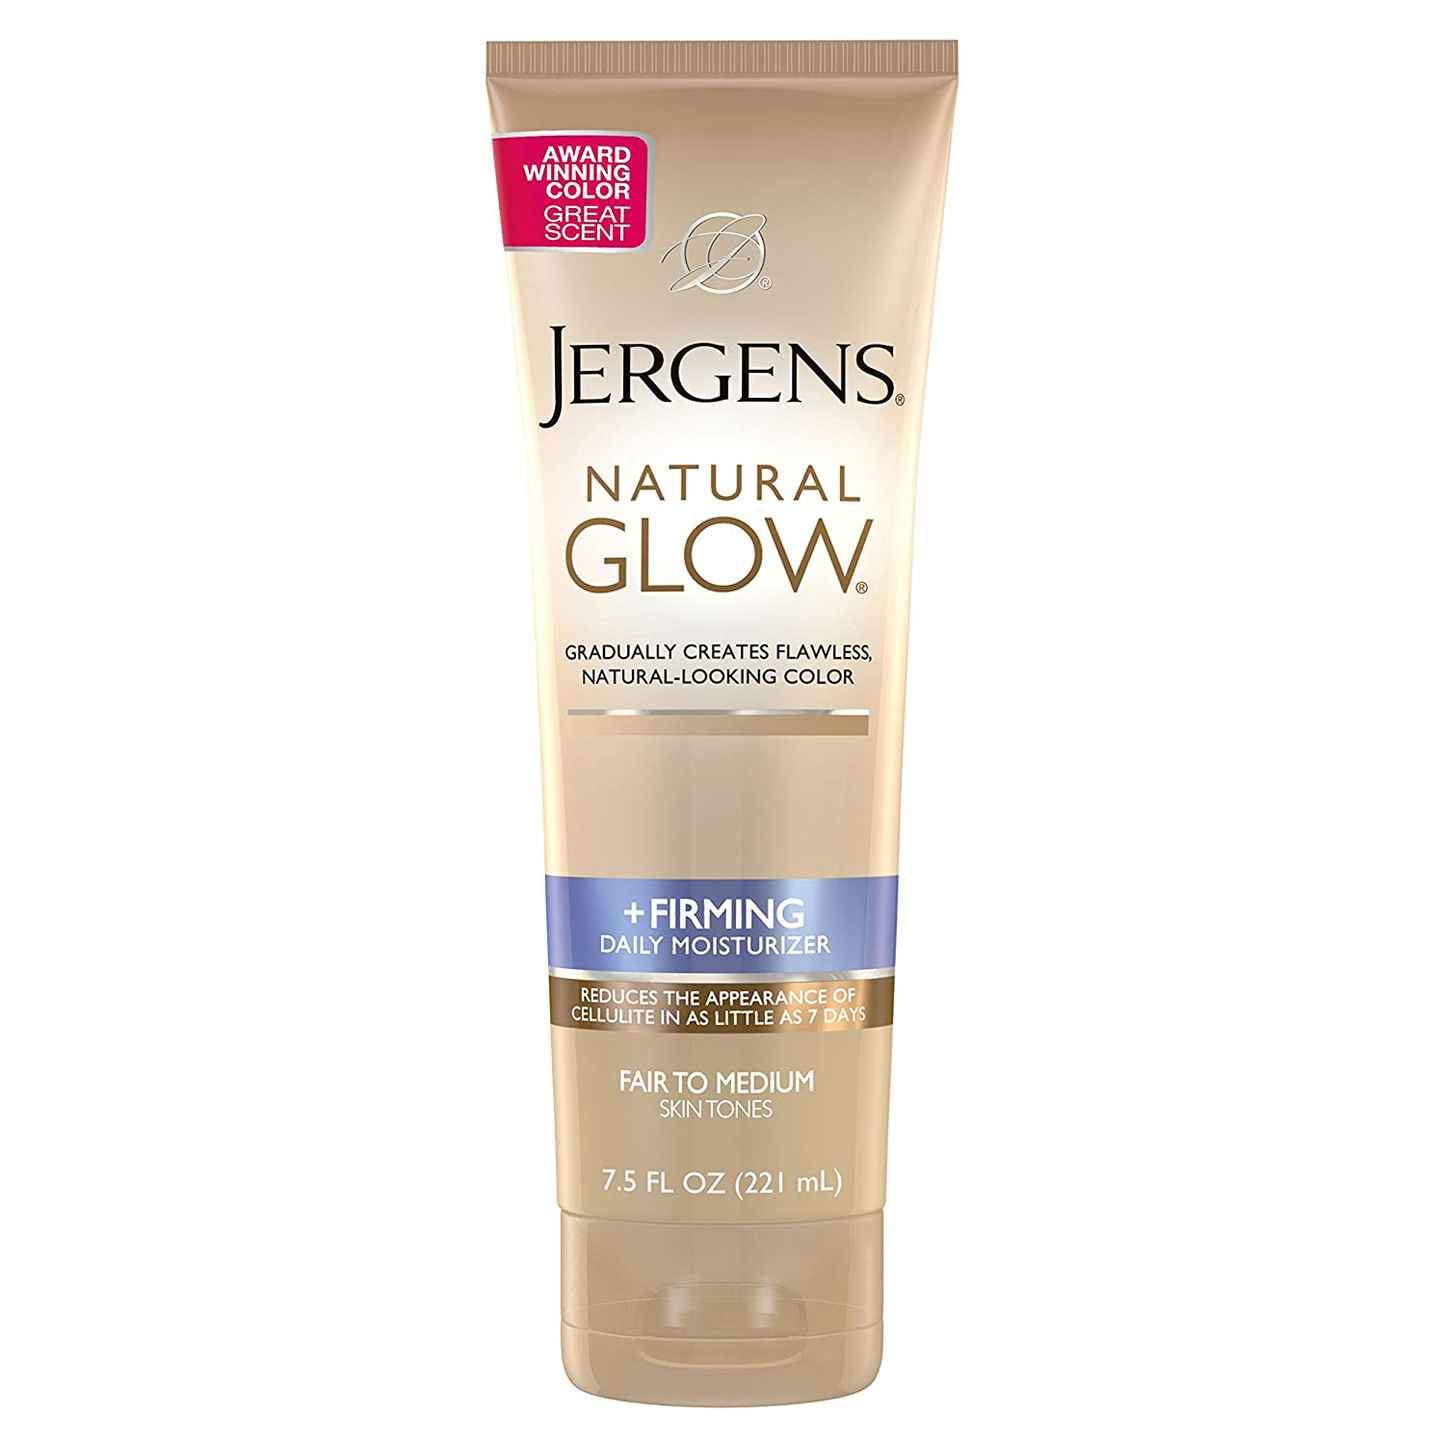 Jergens Natural Glow + FIRMING Self Tanner, Sunless Tanning Lotion for Skin Tone, Anti Cellulite Firming Body Lotion for Natural-Looking Tan, Oz, Fair to Medium, Fresh, 7.5 Fl Oz (Packaging May Vary)